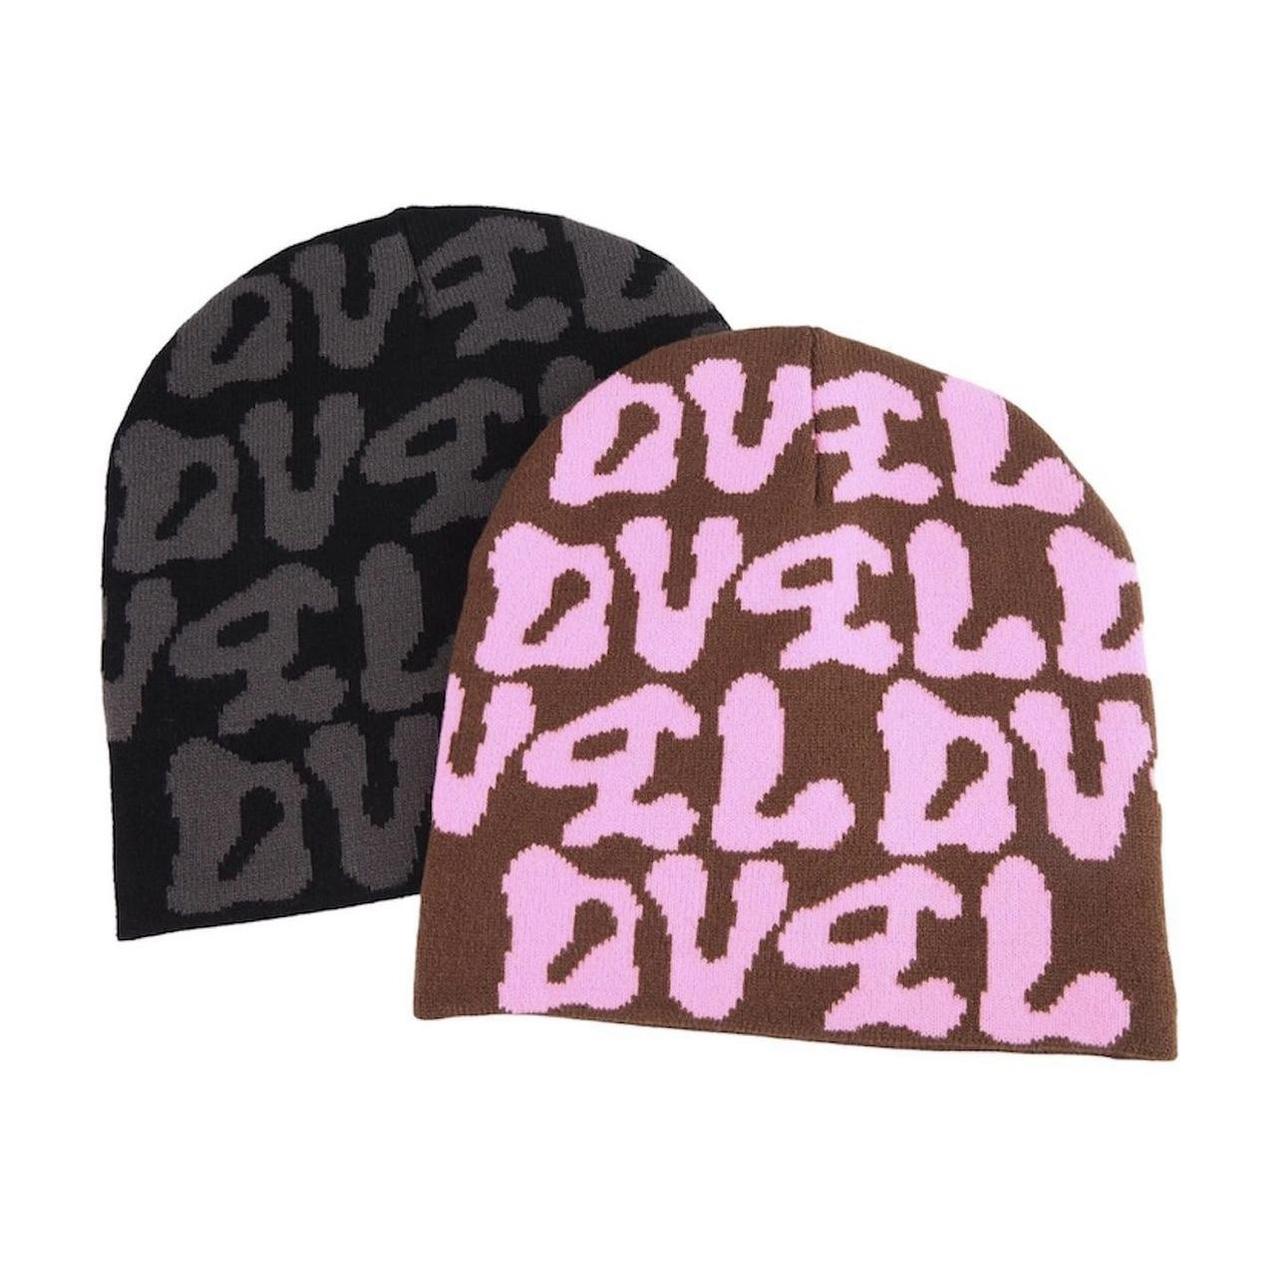 Antioch Men's Pink and Brown Hat